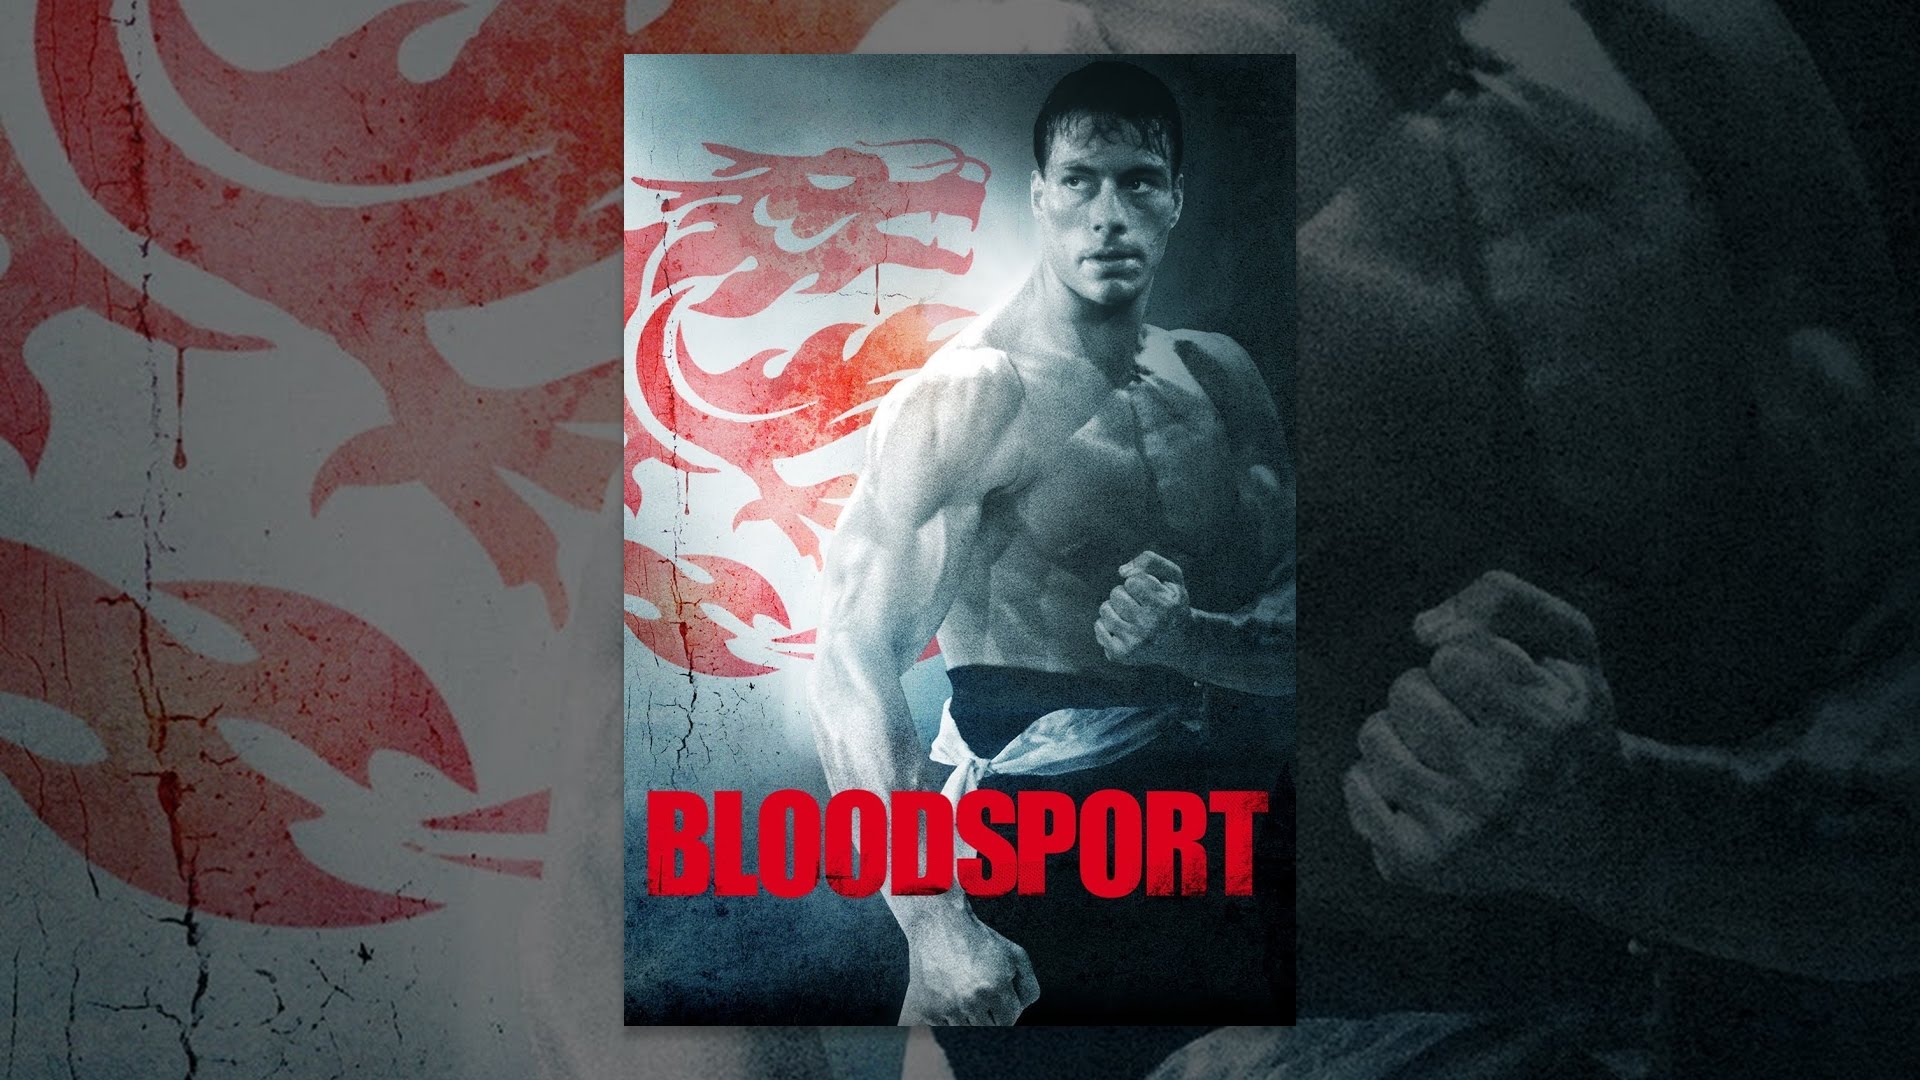 Bloodsport - watch full movie free with ads